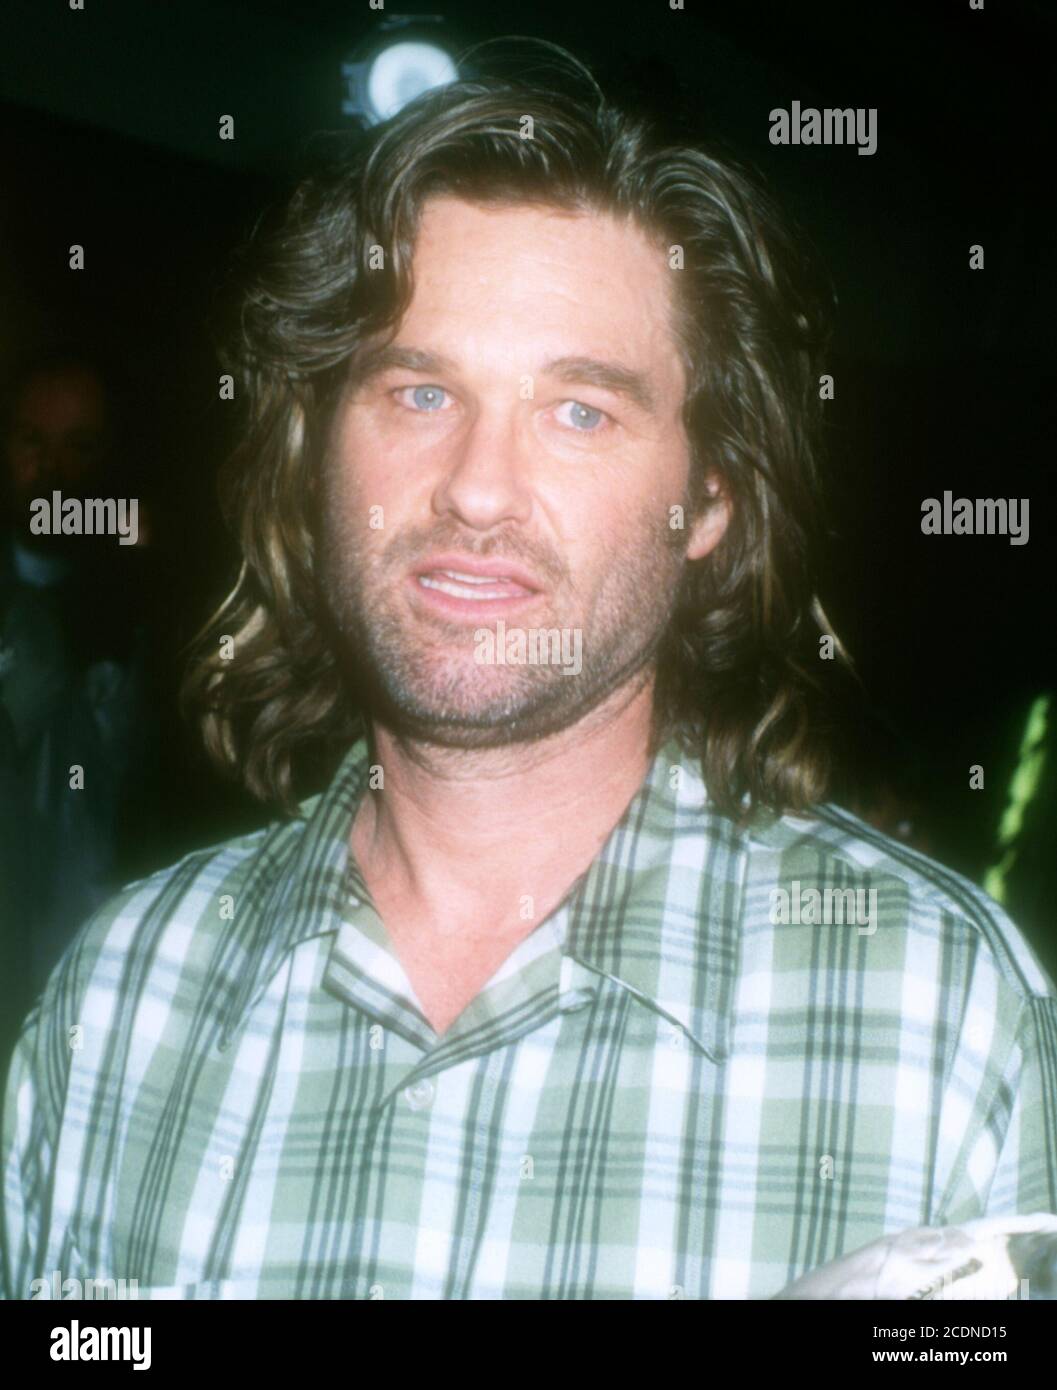 Westwood, California, USA 11th March 1996 Actor Kurt Russell attends Warner Bros. Pictures' 'Executive Decision' Premiere on March 11, 1996 at Mann Village Theatre in Westwood, California, USA. Photo by Barry King/Alamy Stock Photo Stock Photo